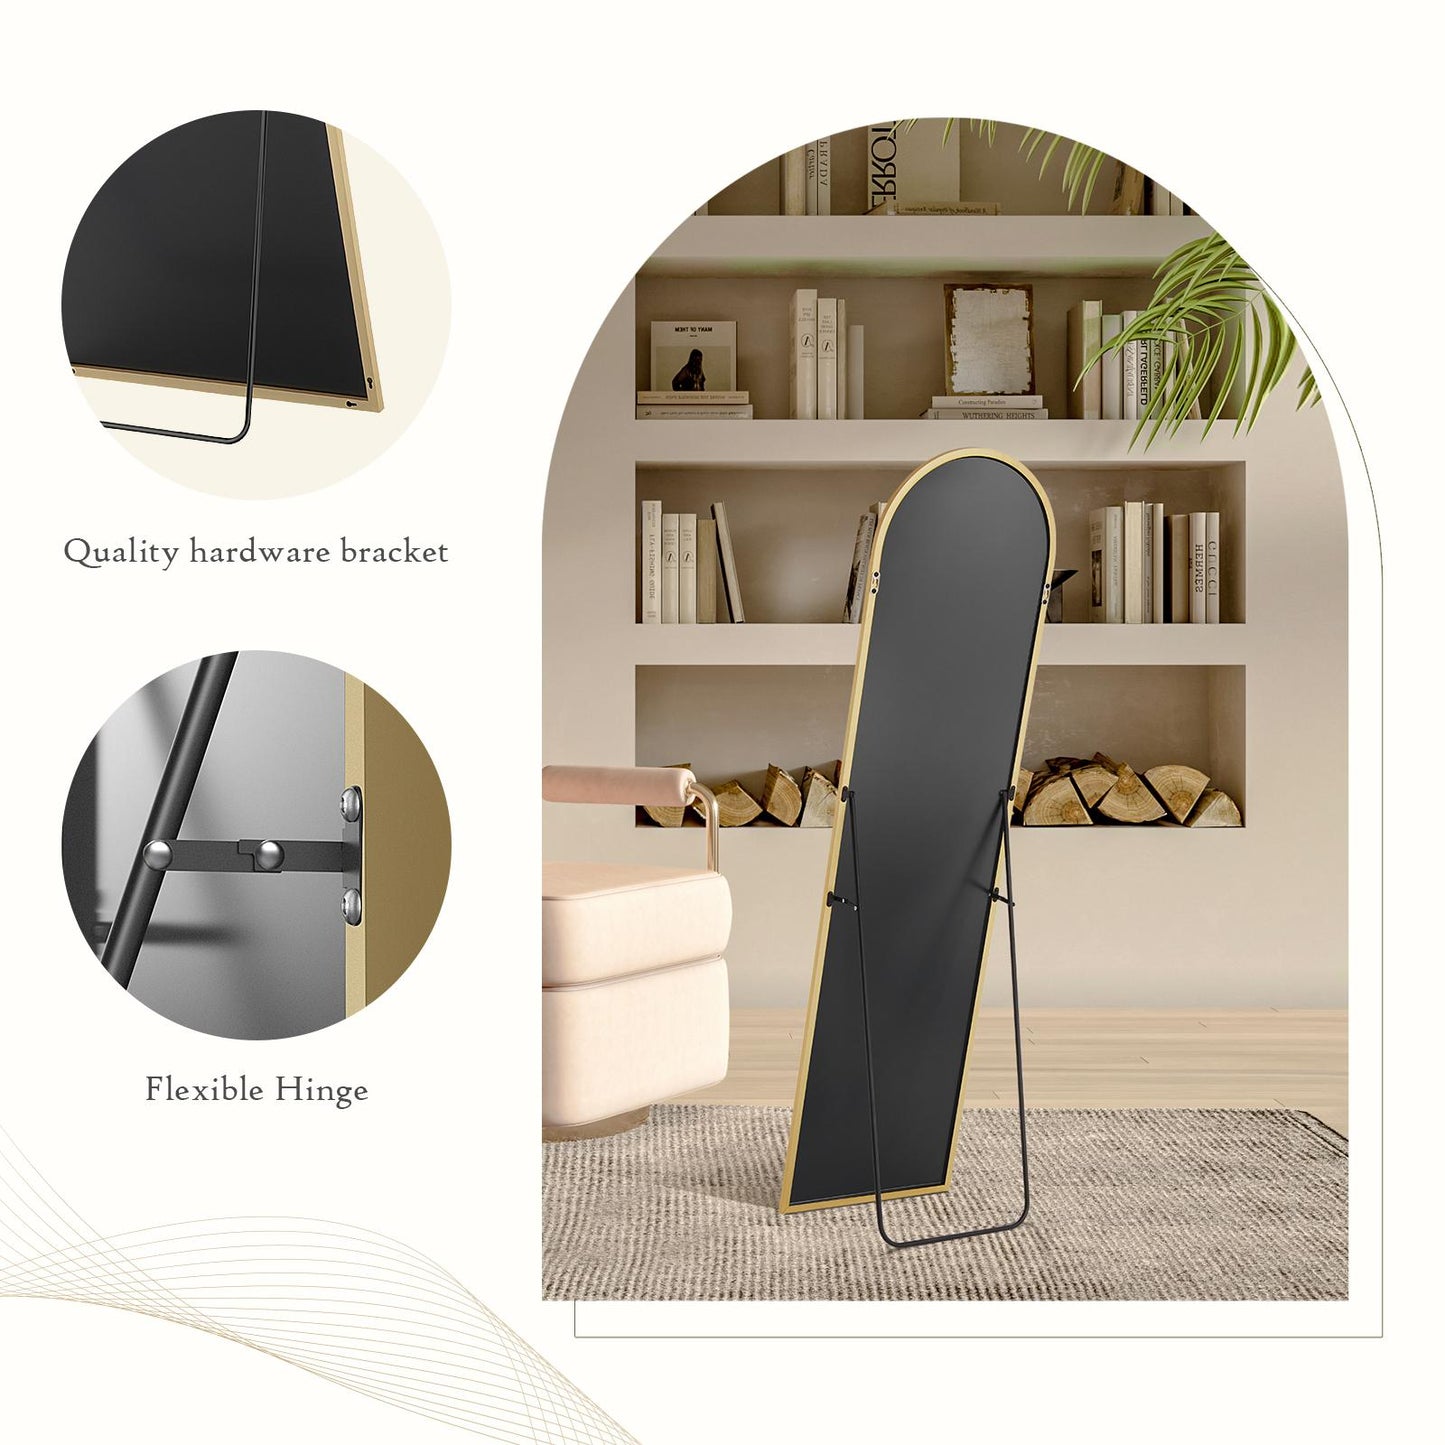 Arched Full-Length Floor Mirror for Standing or Leaning Against Wall